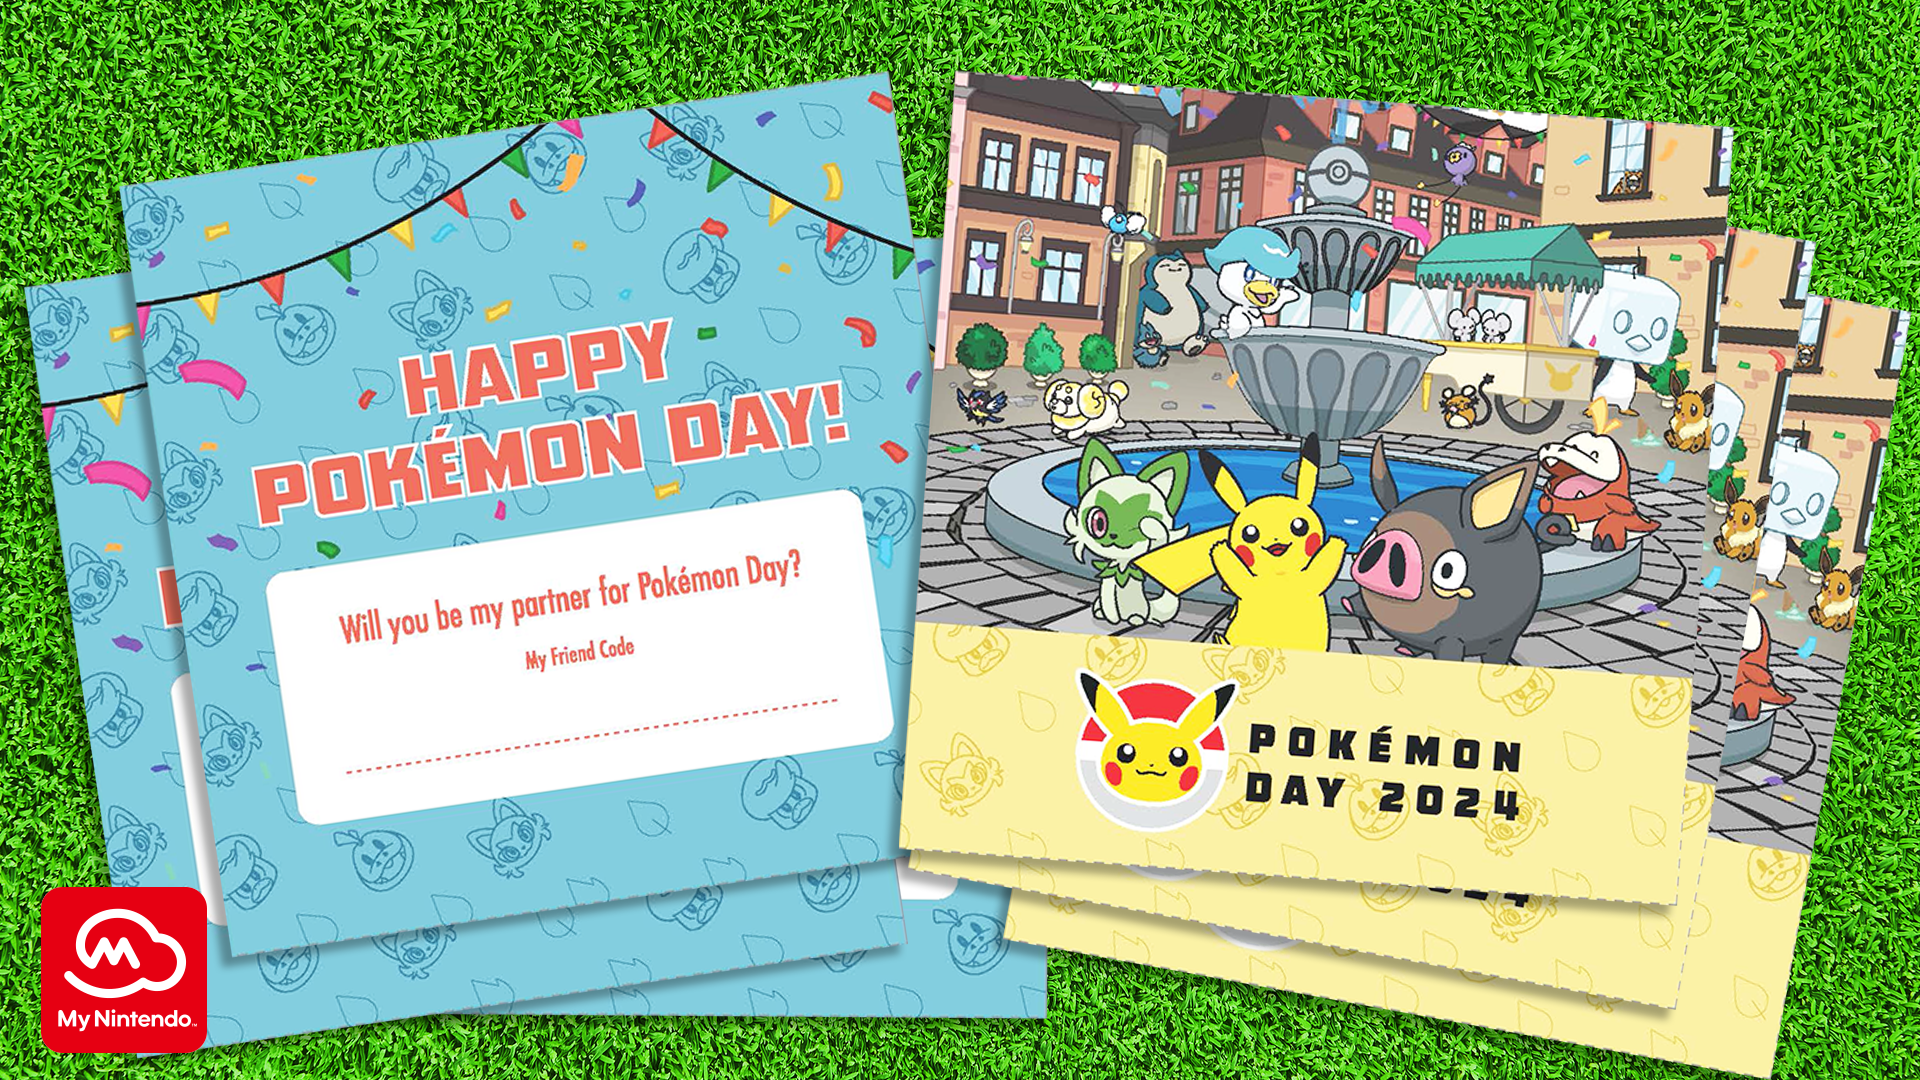 Get ready for Pokémon™ Day on Feb. 27 with a Pokemon Day card!